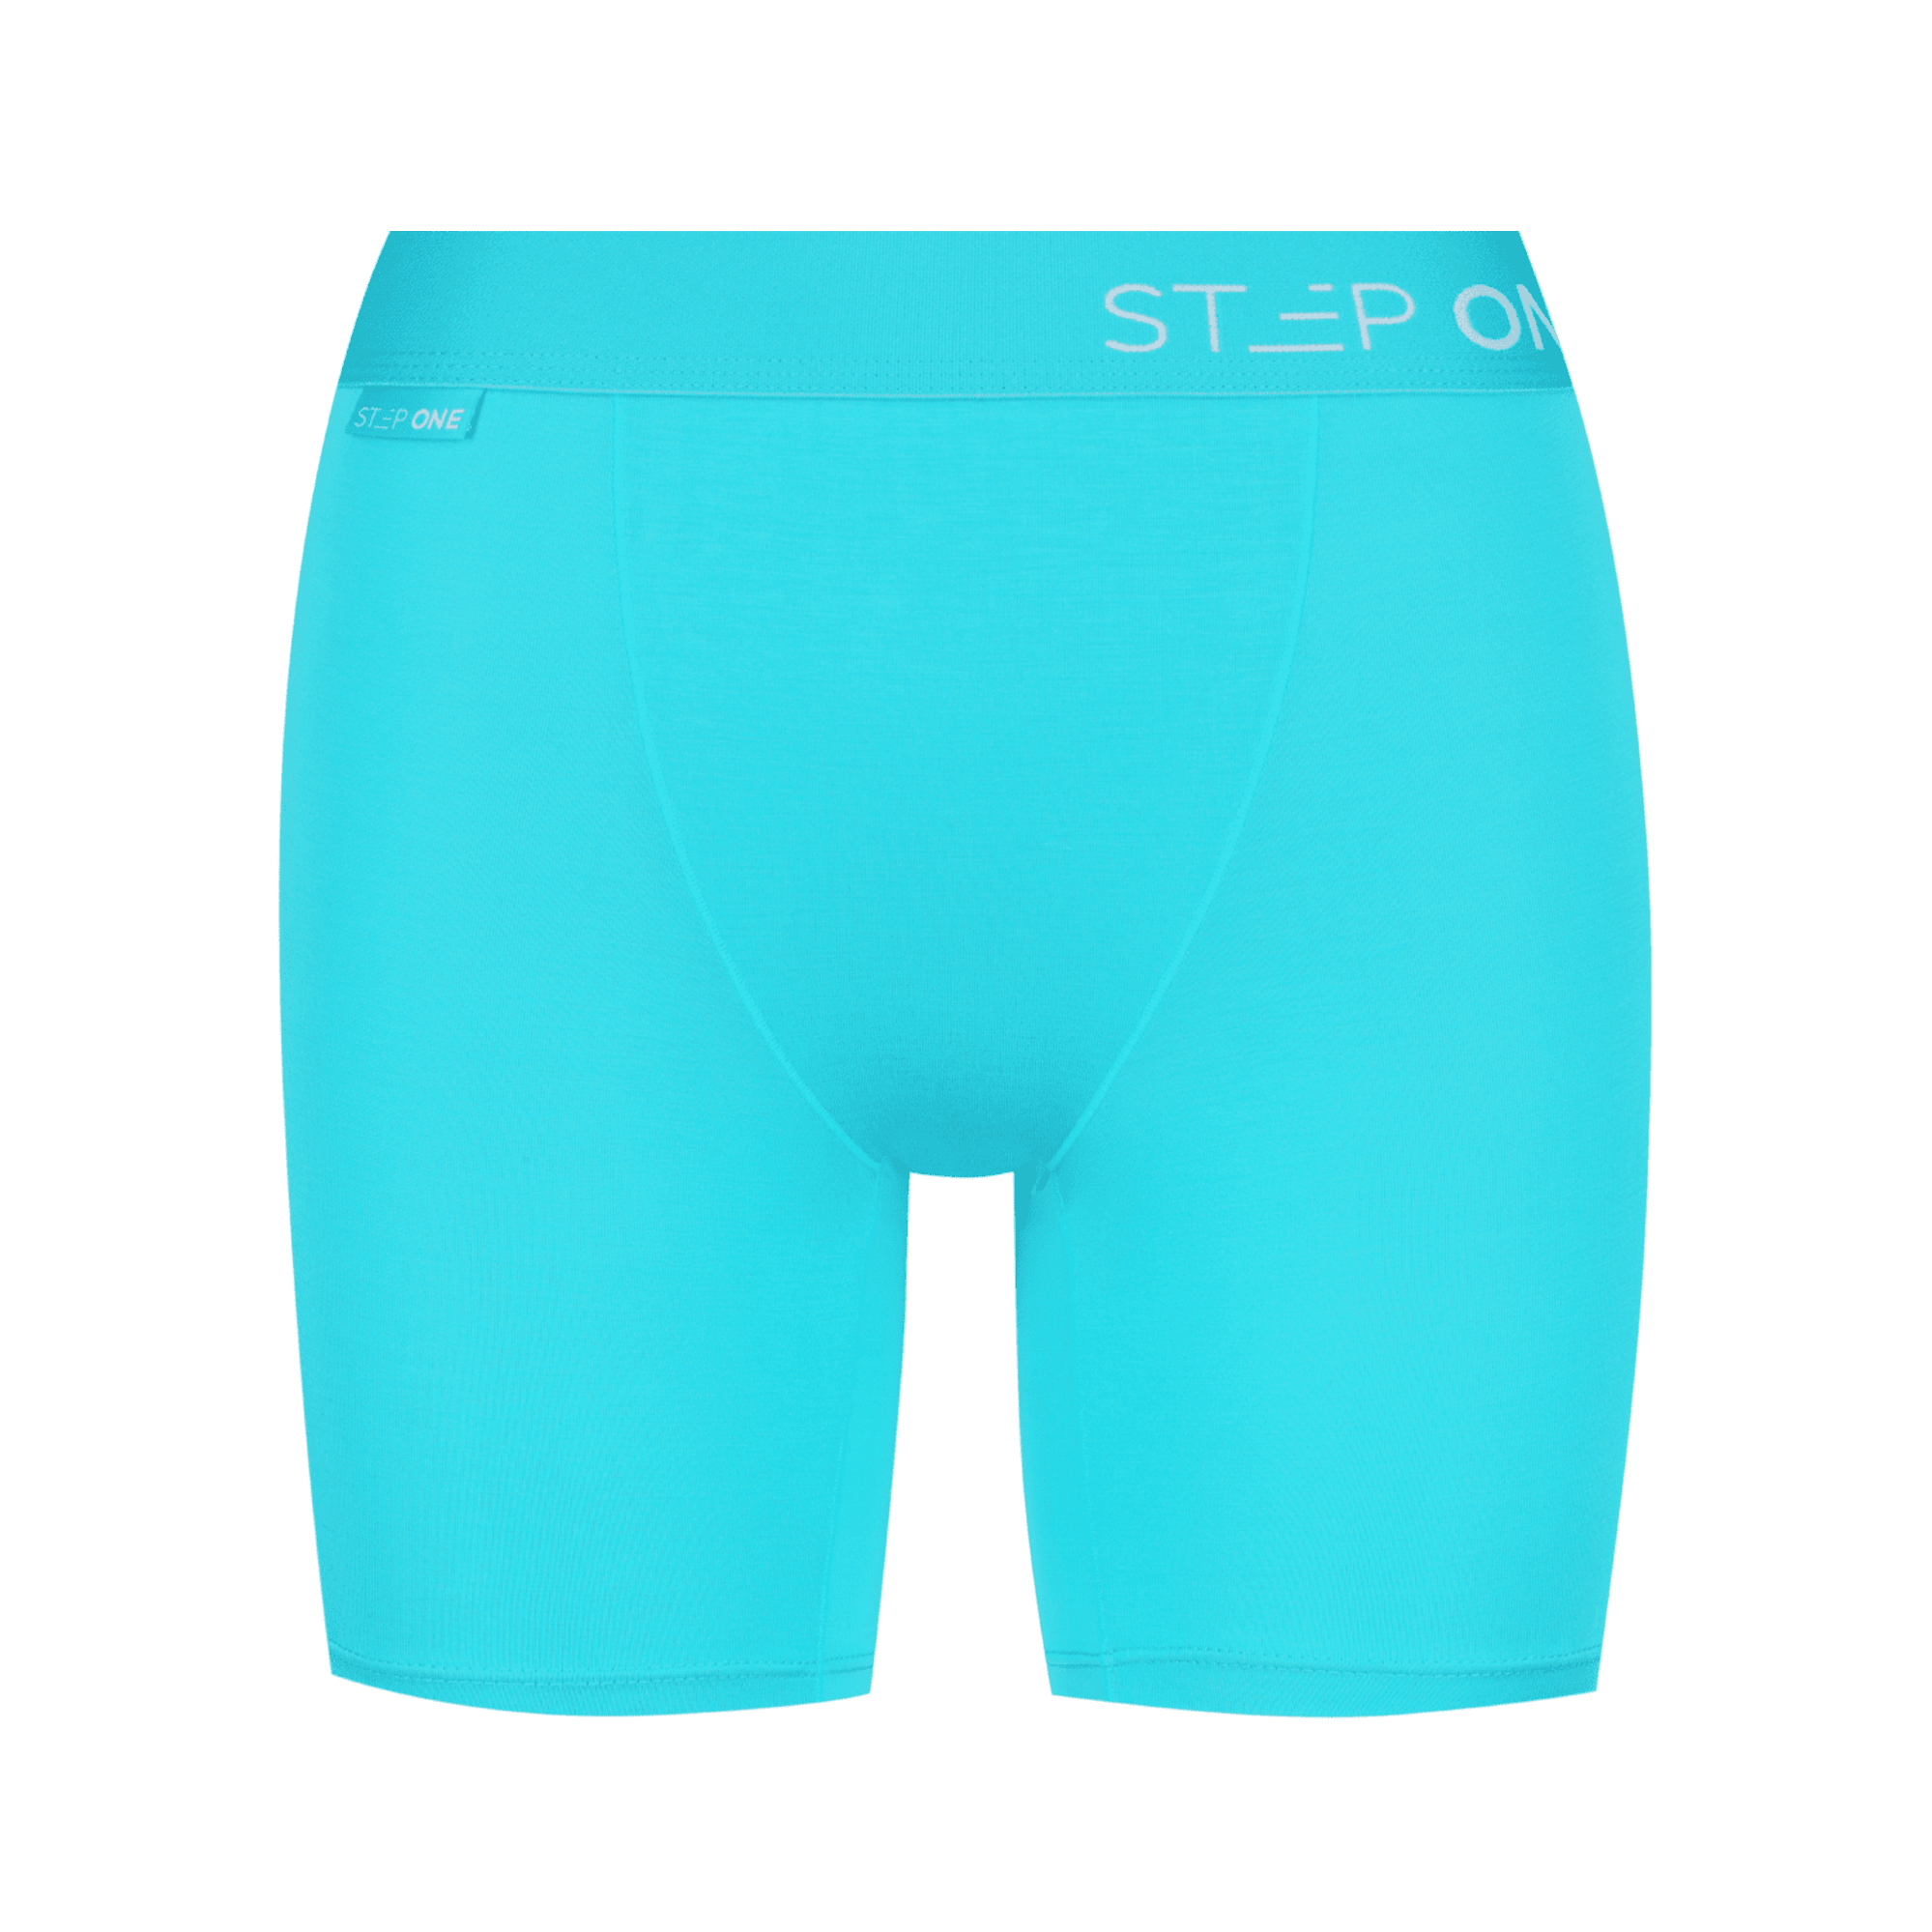 Buy Core Briefs, Fast Delivery